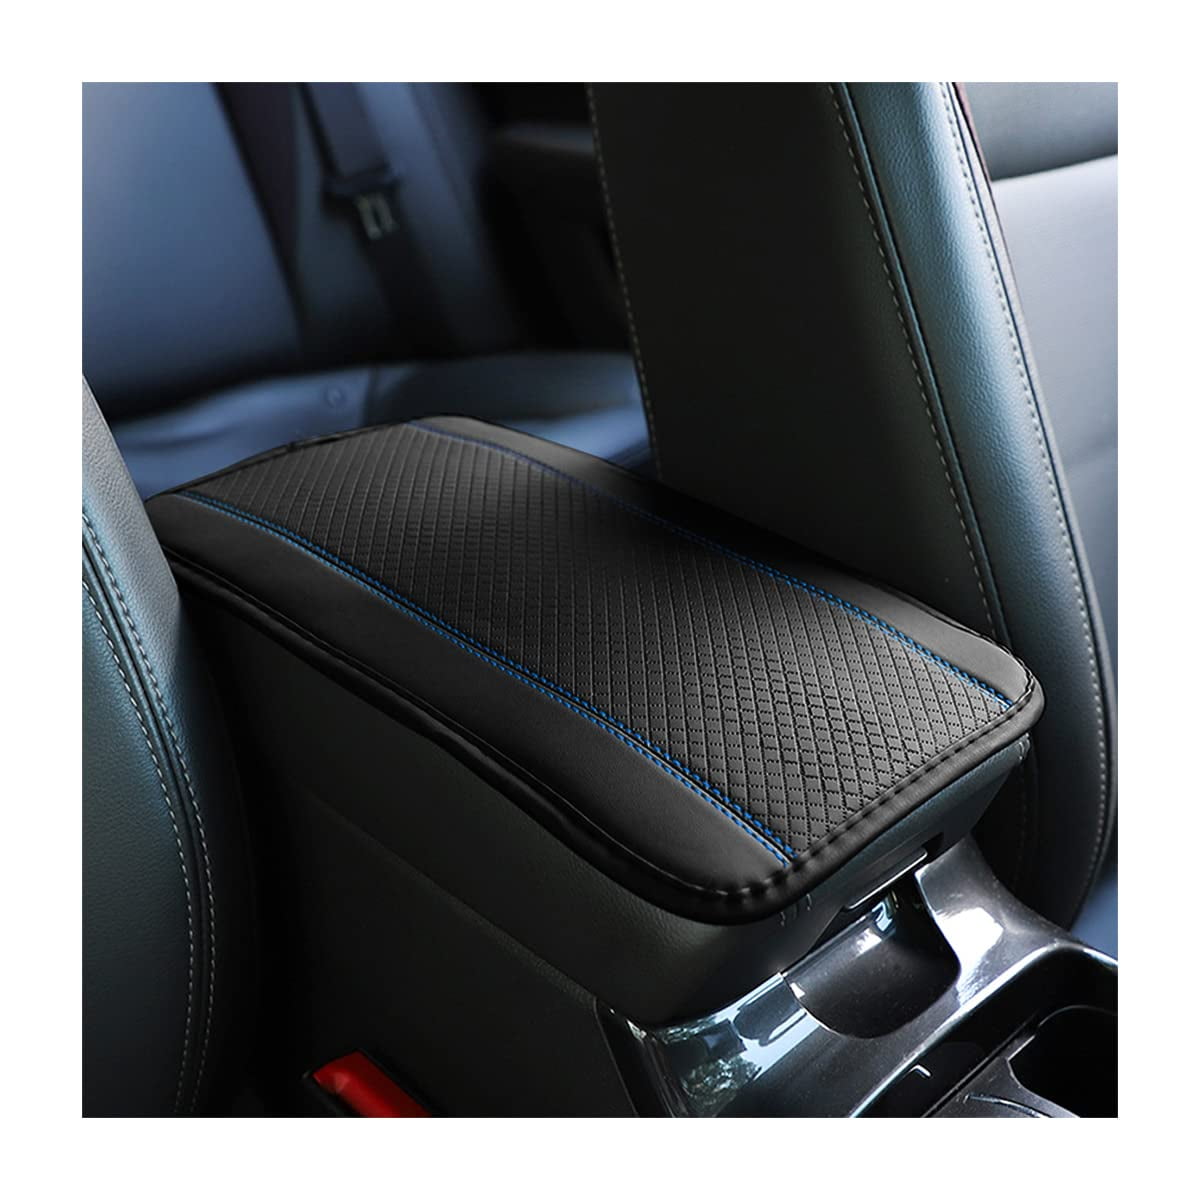 Center Console Arm-rest Cover Pad Universal Fit for SUV/Truck/Car, Car  Armrest Seat Box